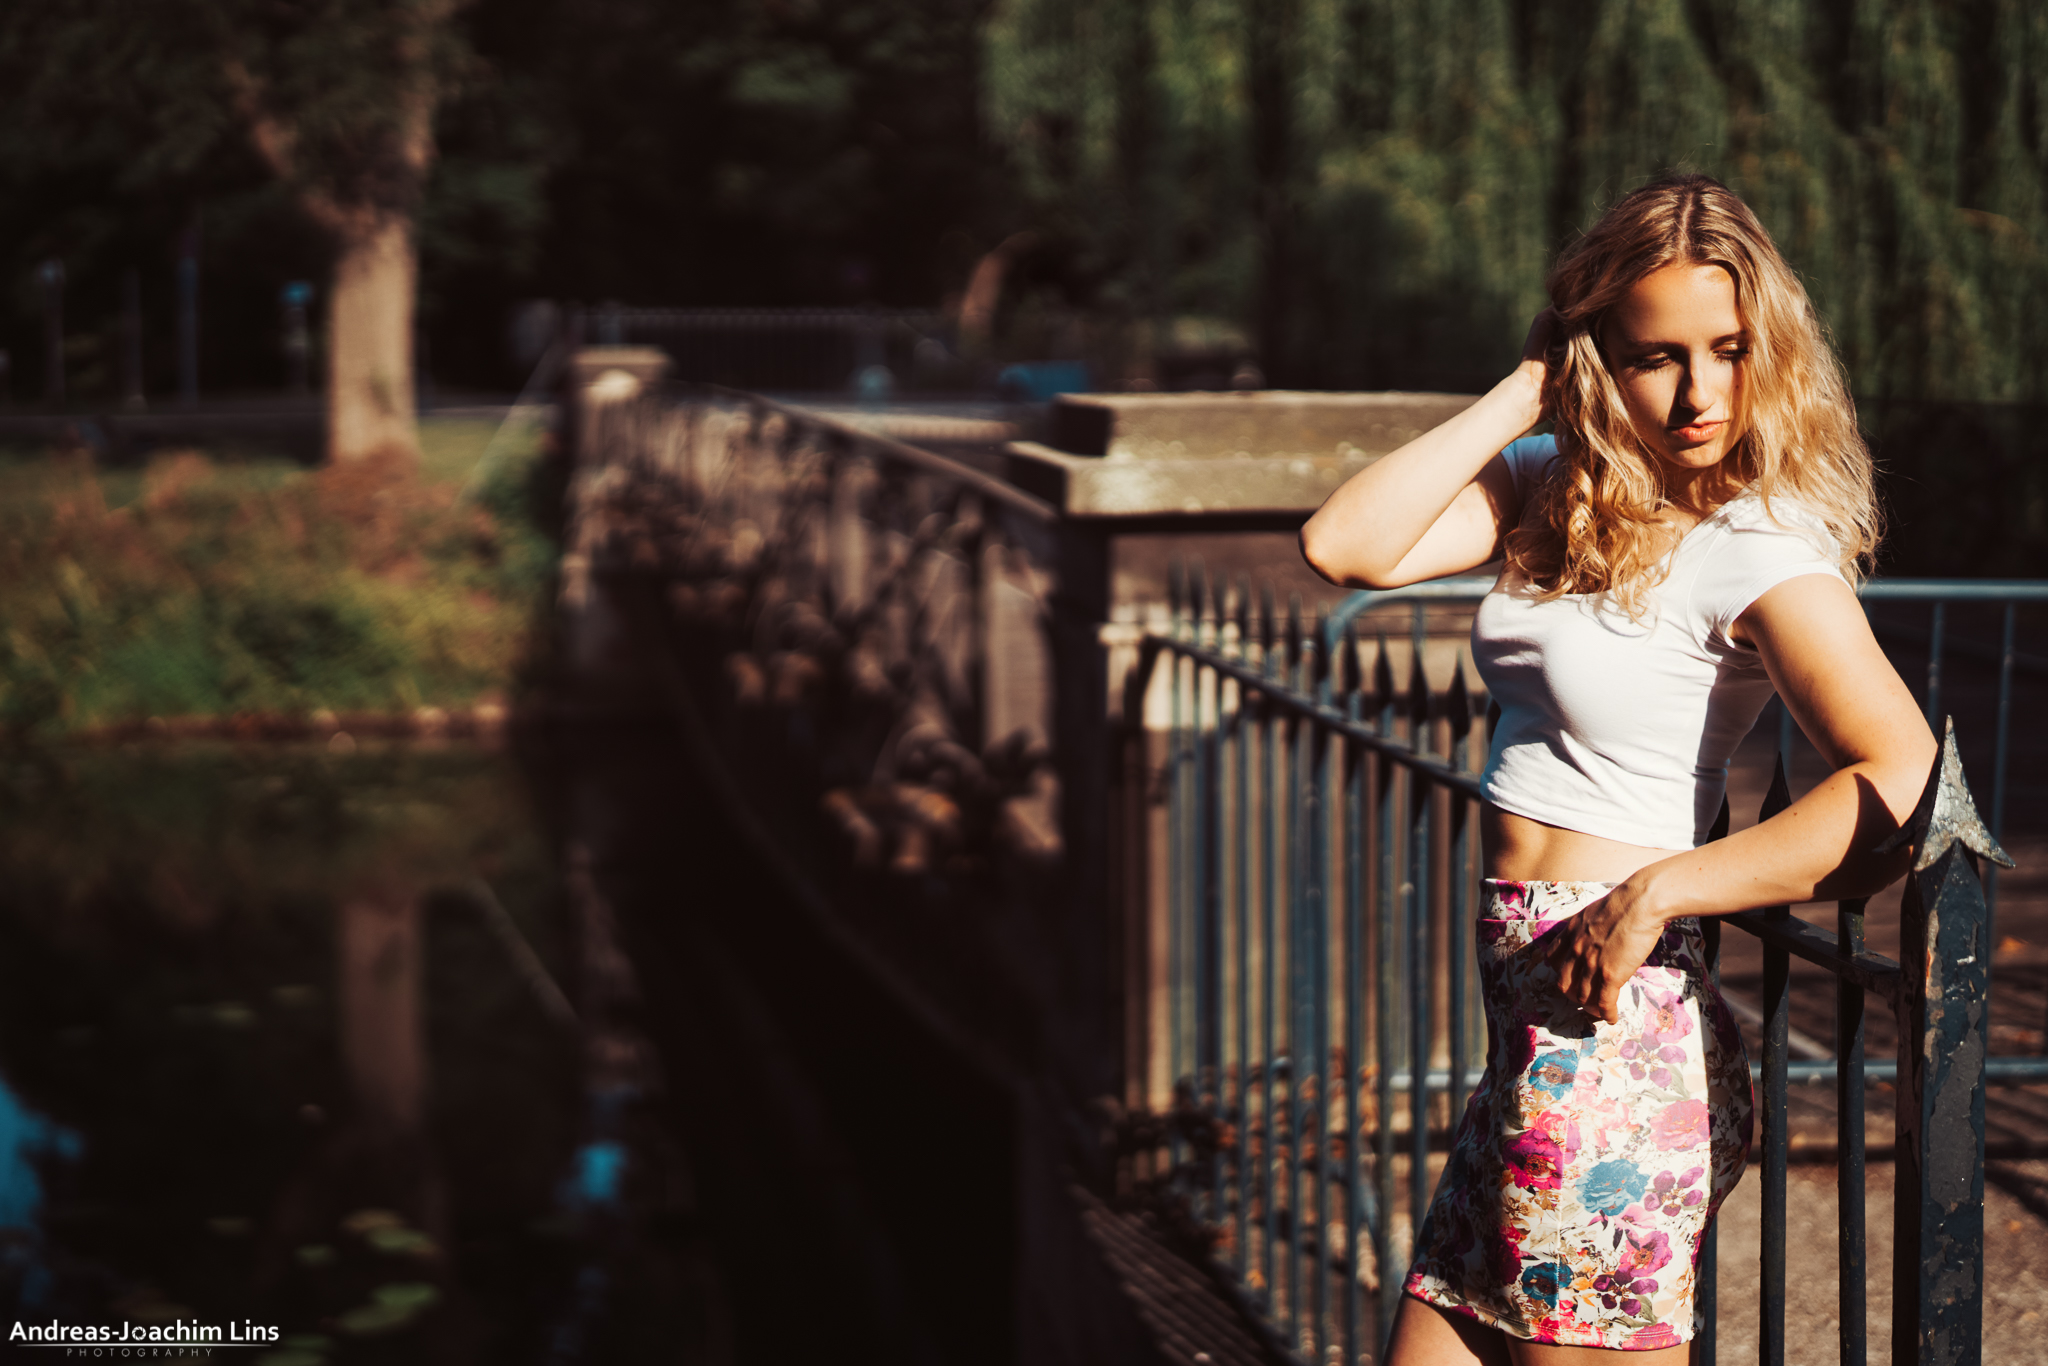 People 2048x1366 Andreas-Joachim Lins women model women outdoors blonde hands on head water white tops tight Skirt bridge fitness model outdoors looking away leaning T-shirt